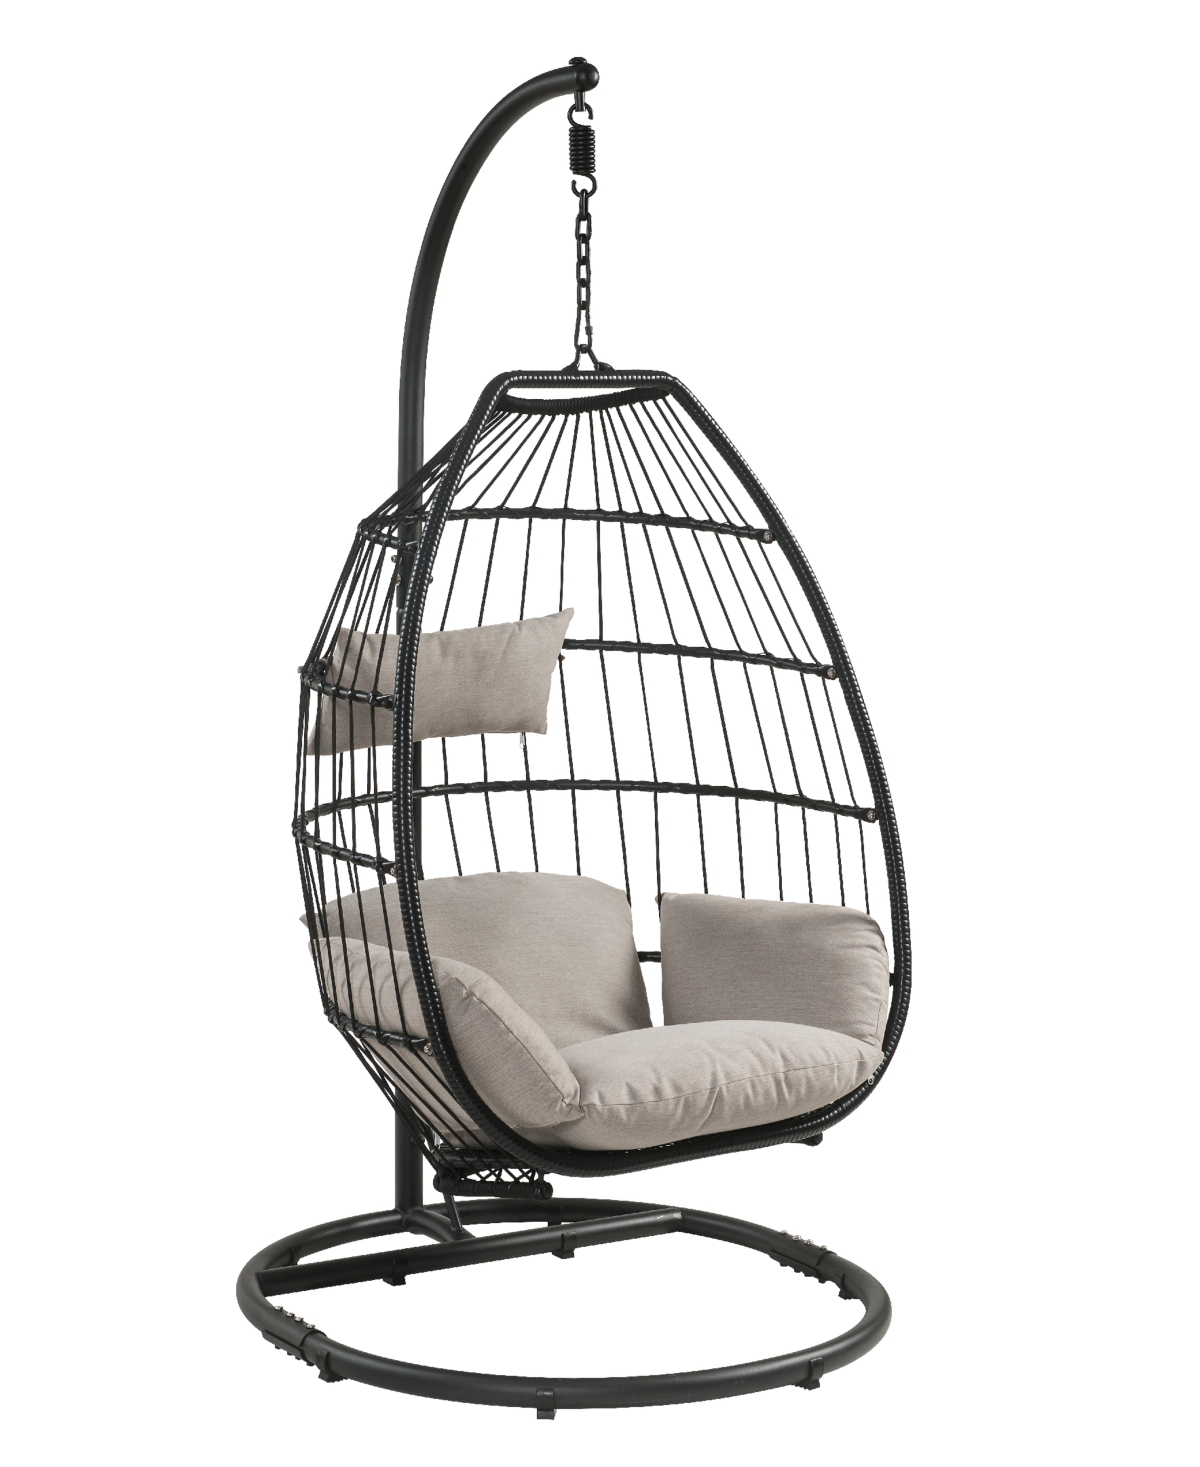 Acme Furniture Oldi Hanging Patio Chair In Beige Fabric And Black Wicker